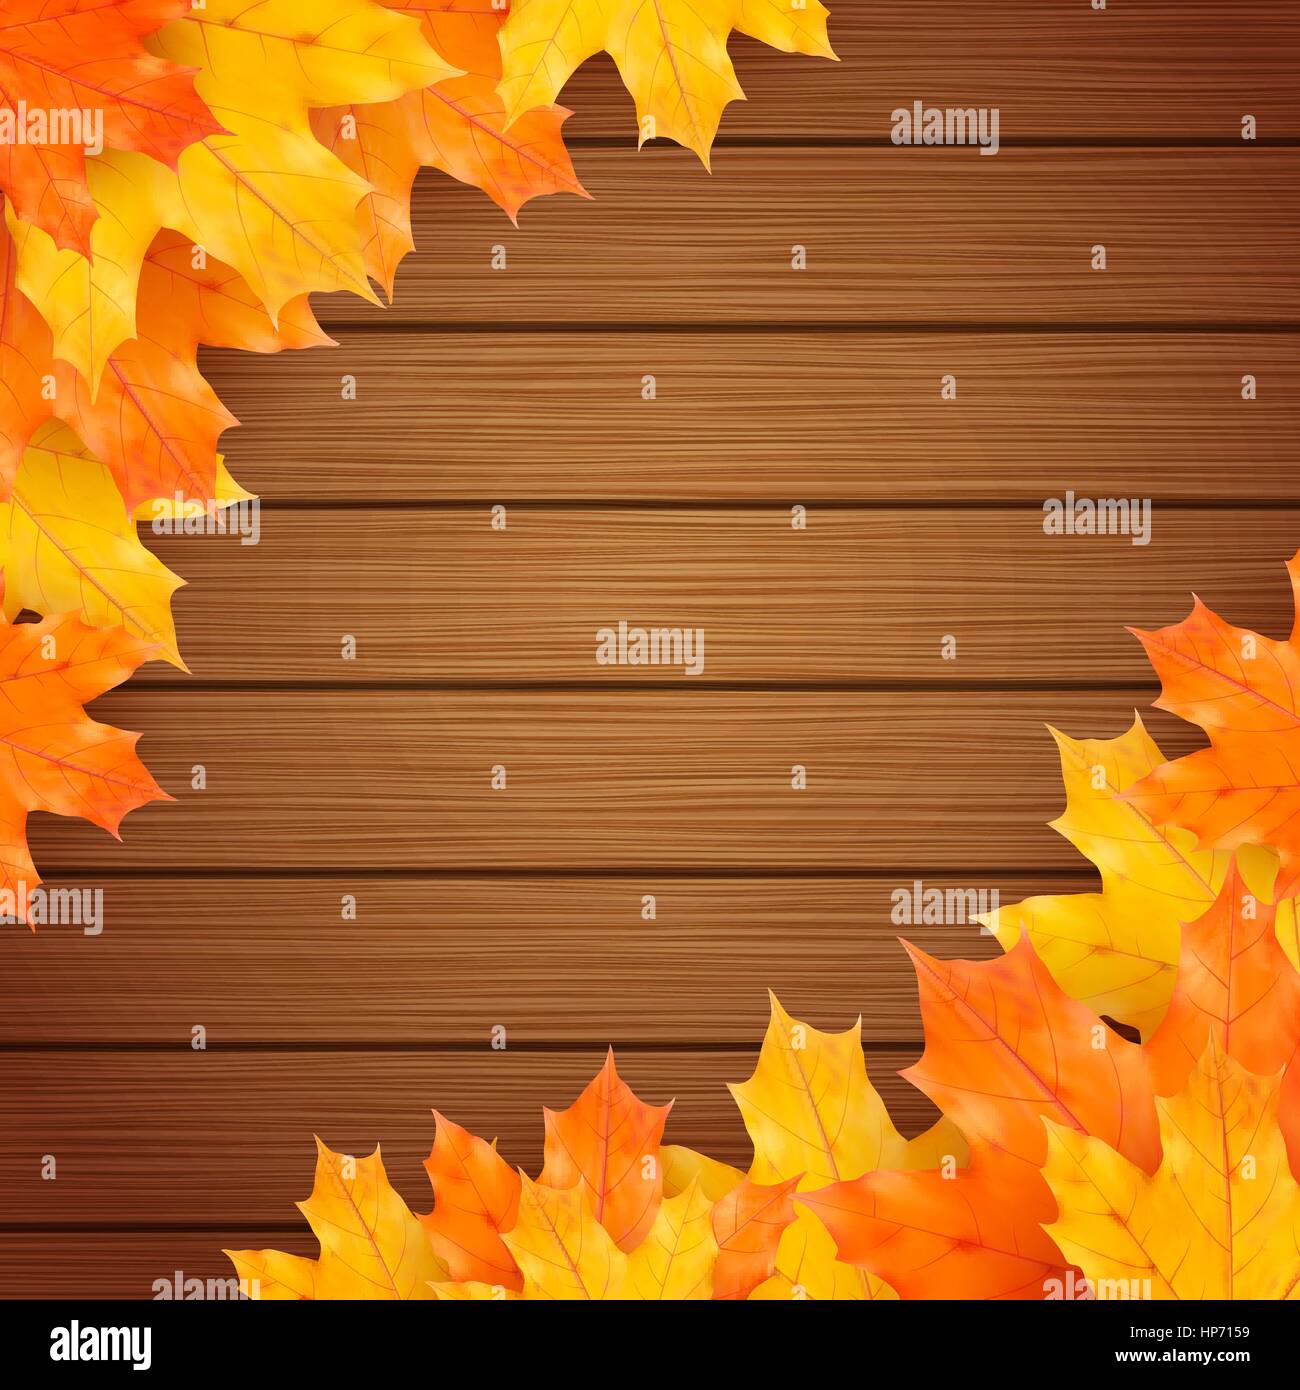 Autumn vector background with realistic maples leaves on wooden board Stock Vector